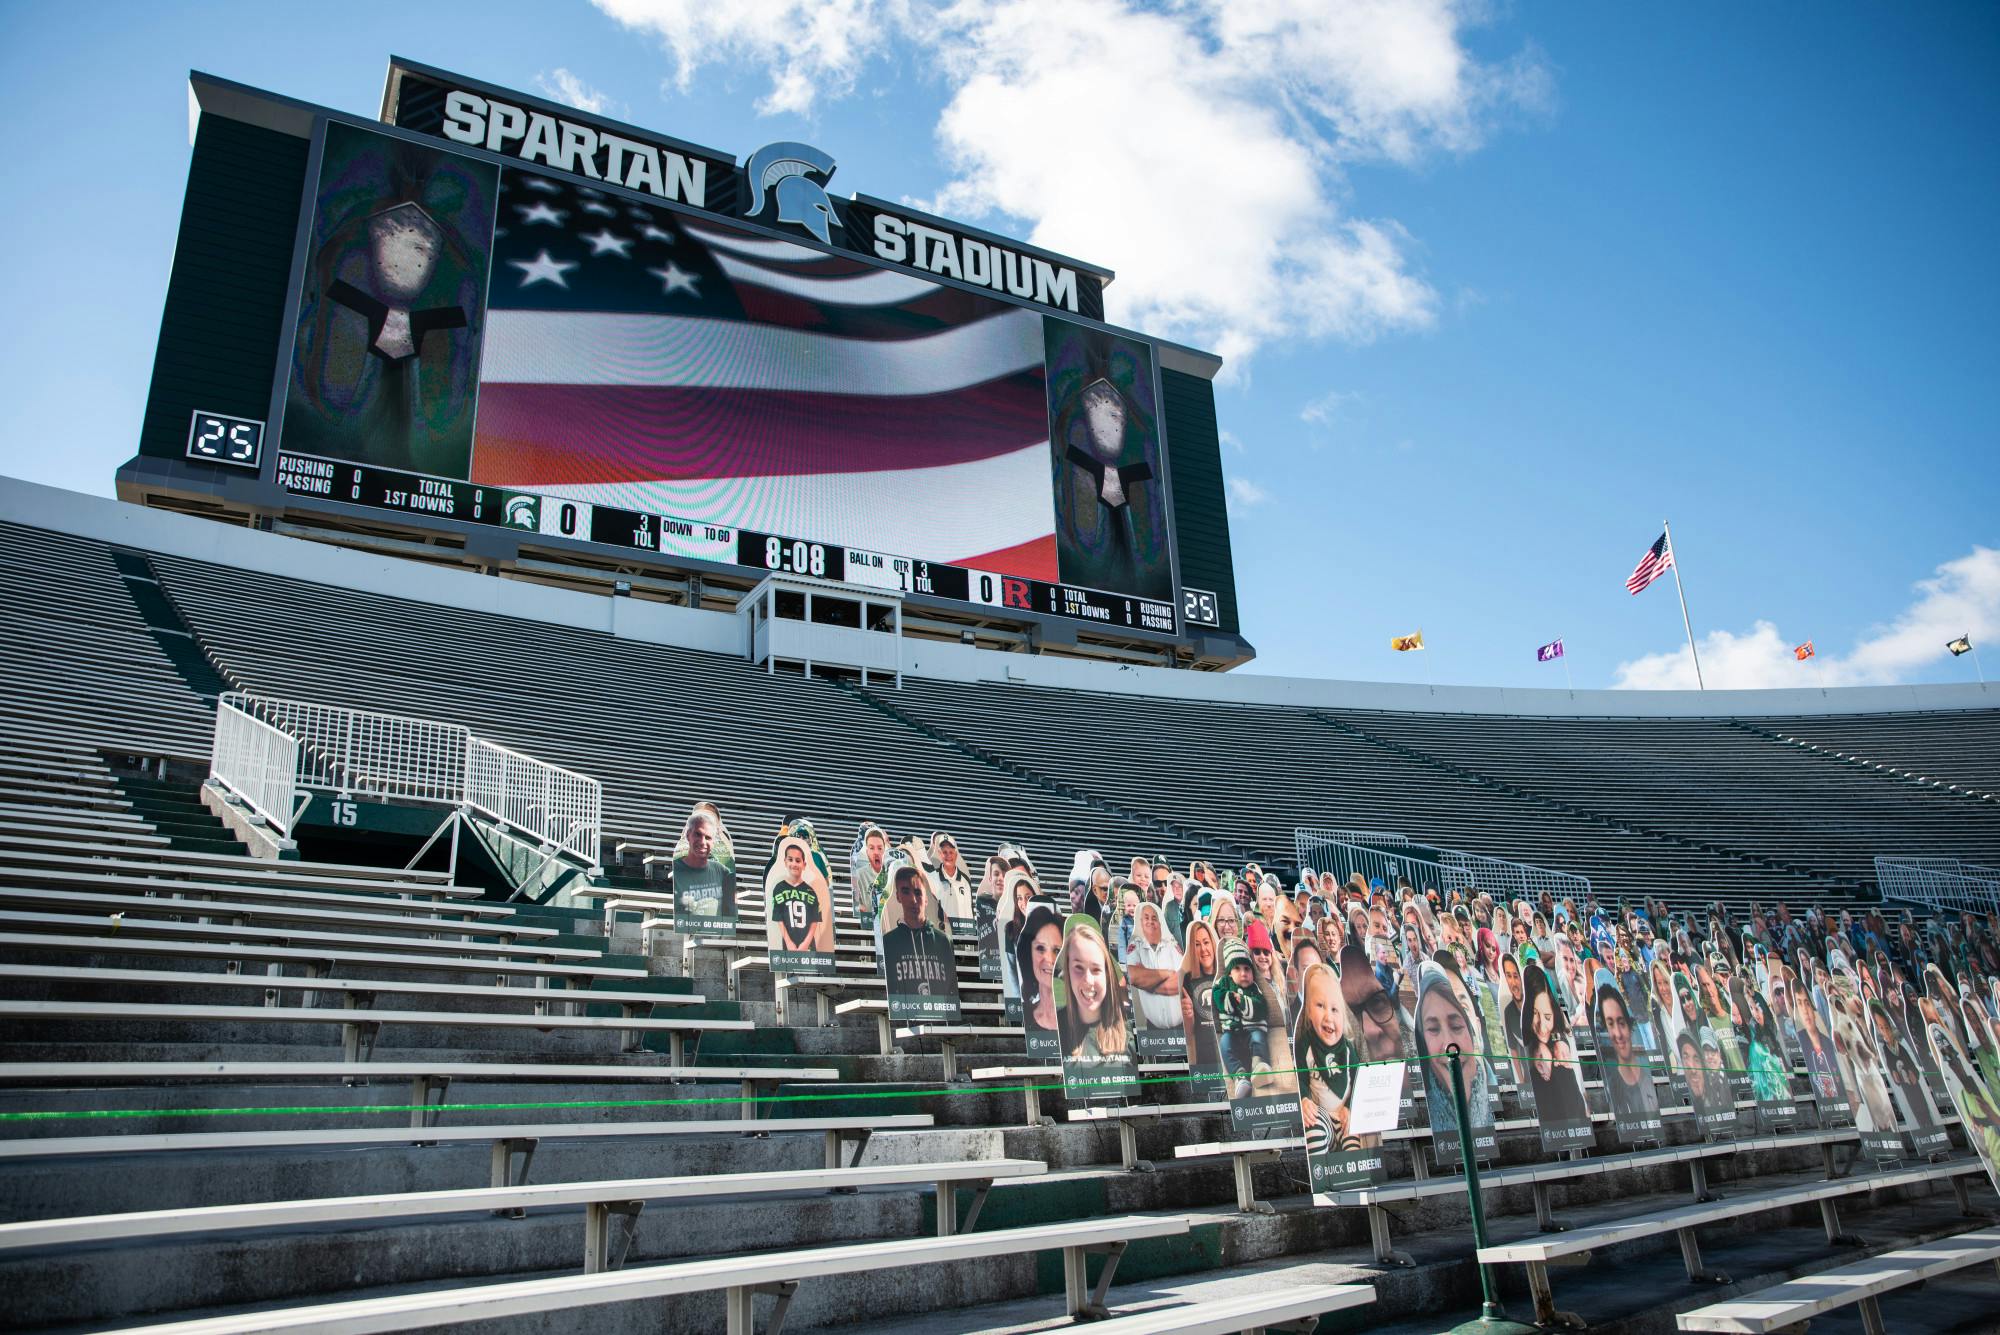 MSU stadium houses the first Spartan football game of the season on Oct. 24, 2020. Cardboard cutouts of fans cheer on from the stands.